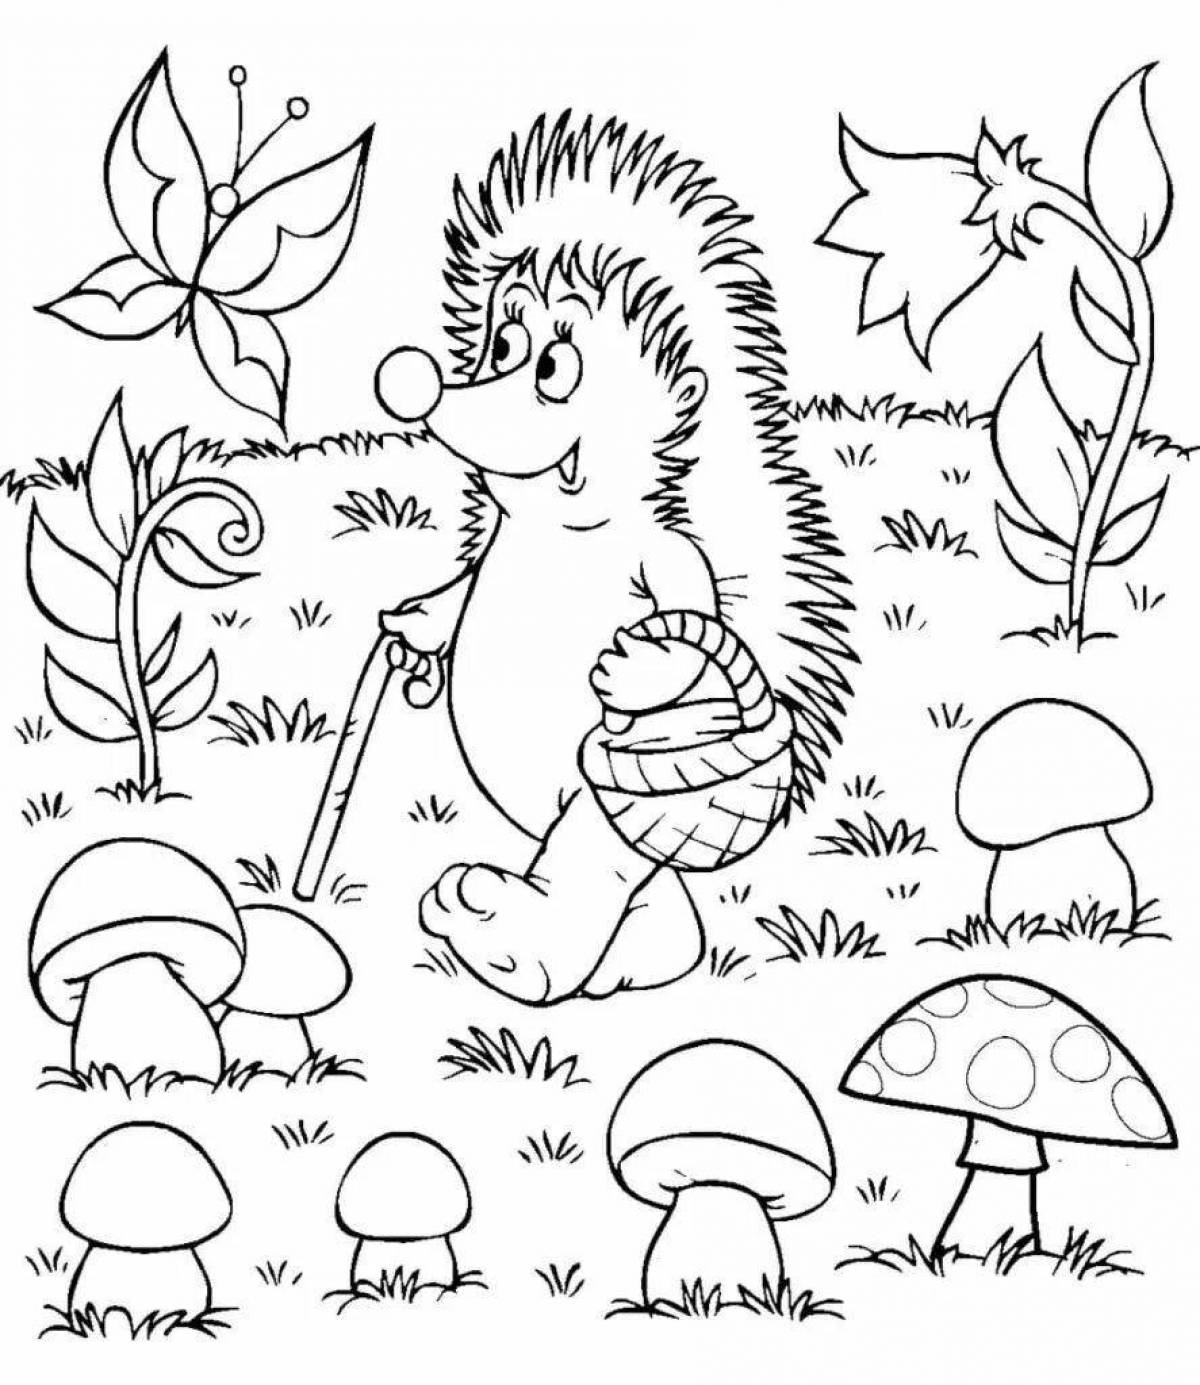 Crazy autumn coloring book for kids 6-7 years old